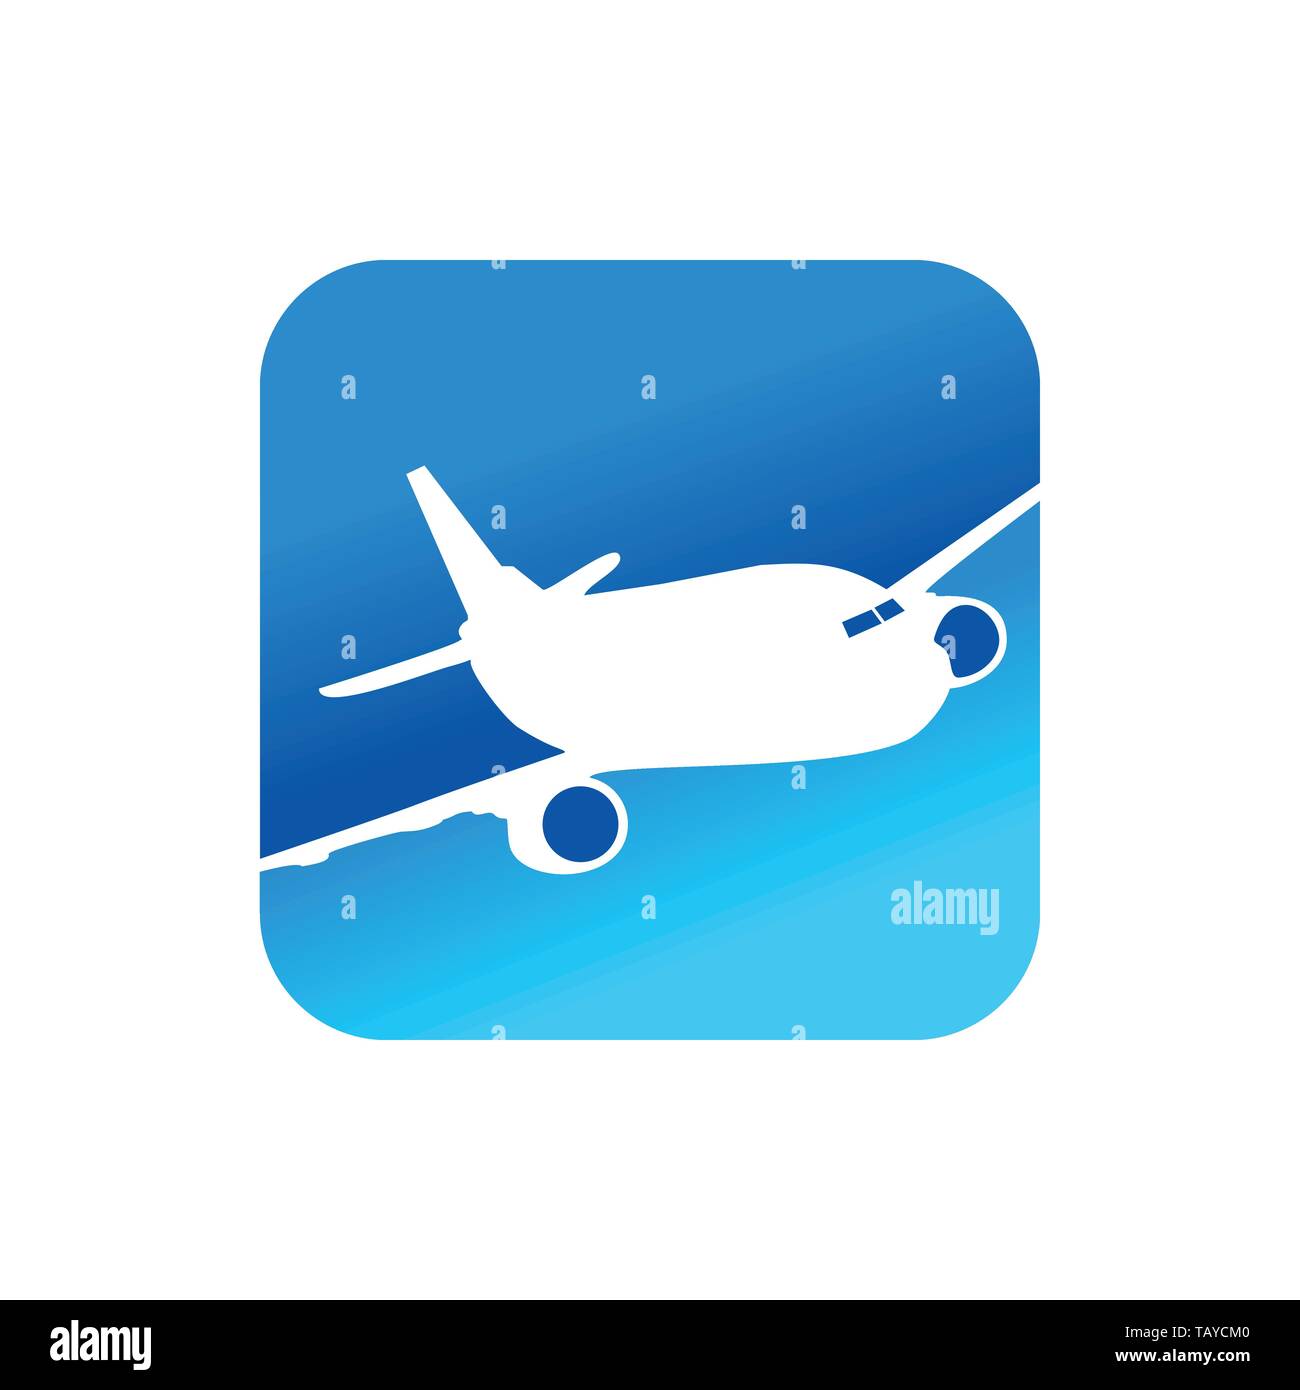 Flying Airplane Blue Rounded Square Shape Vector Icon Symbol Graphic Logo Design Template Stock Vector